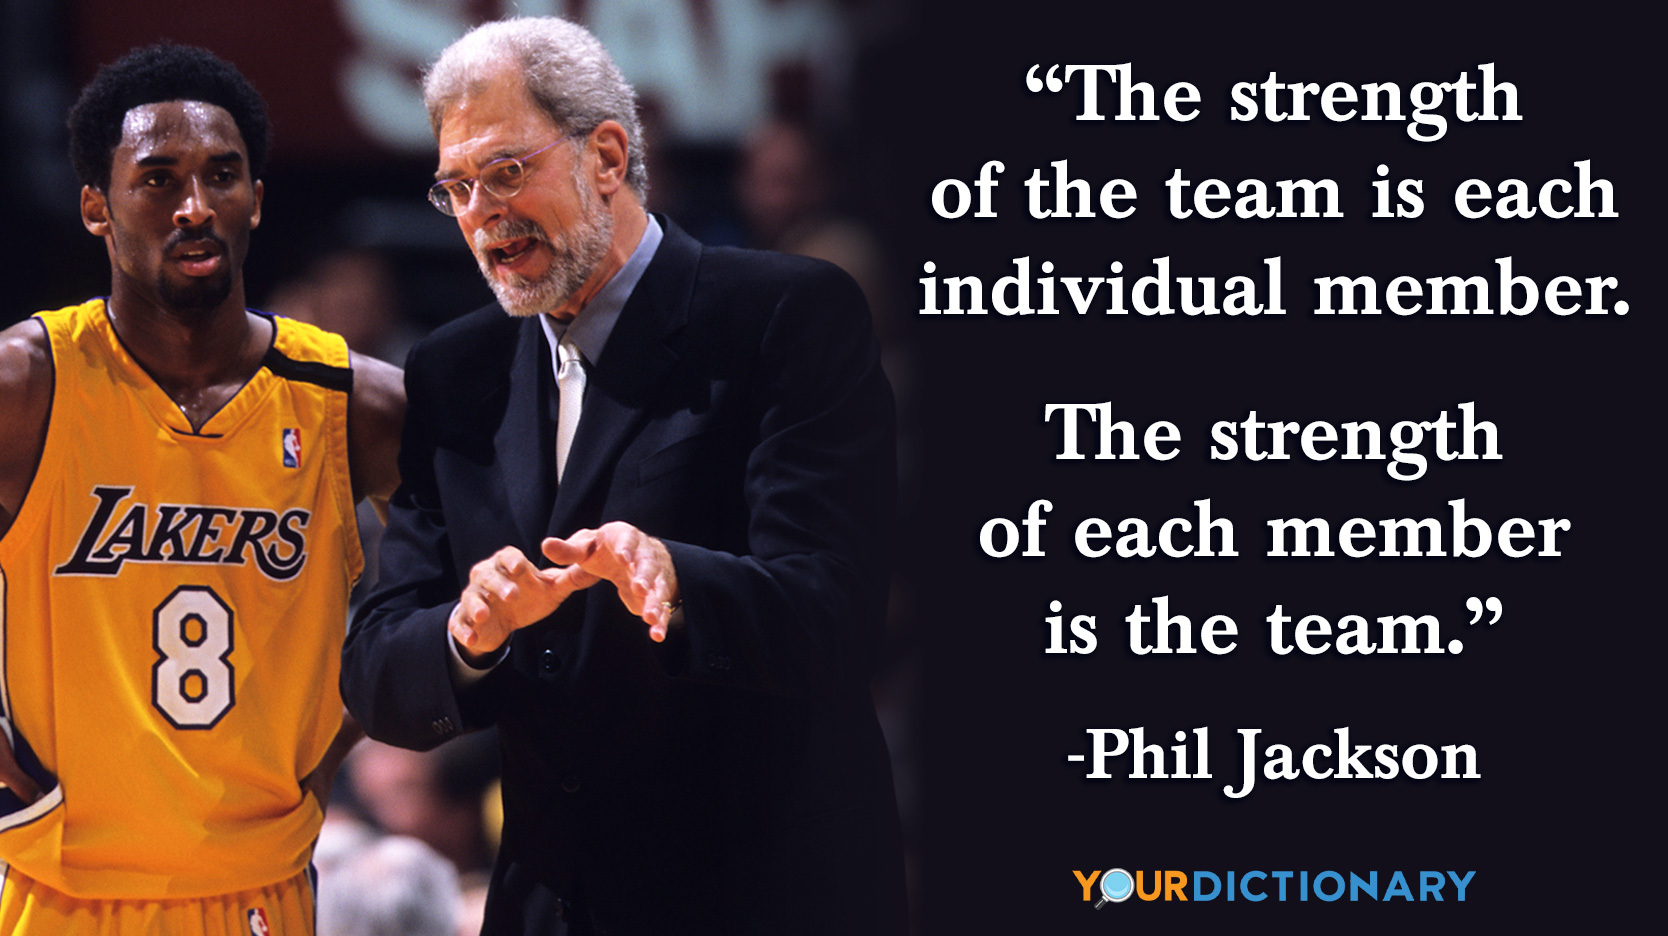 sports quote phil jackson basketball team